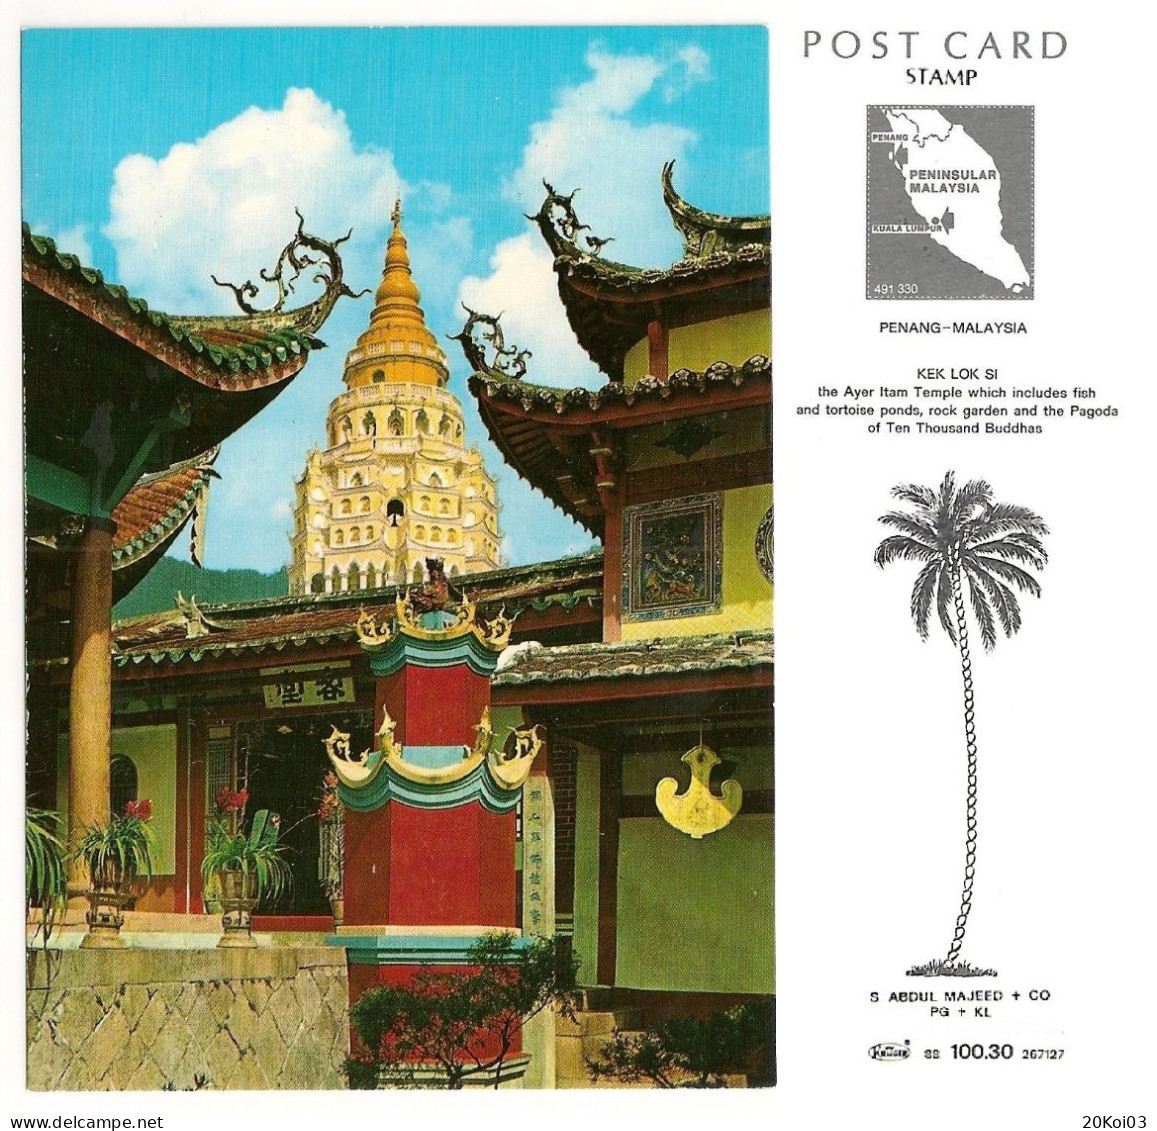 Malaysia Penang KEK LOK SI, Ayer Itam Temple, +/-1975's_UNC SUP_Kruger 88_100.30_S Abdul Majeed+CO_PG+KL_CPSM_cpc - Maleisië